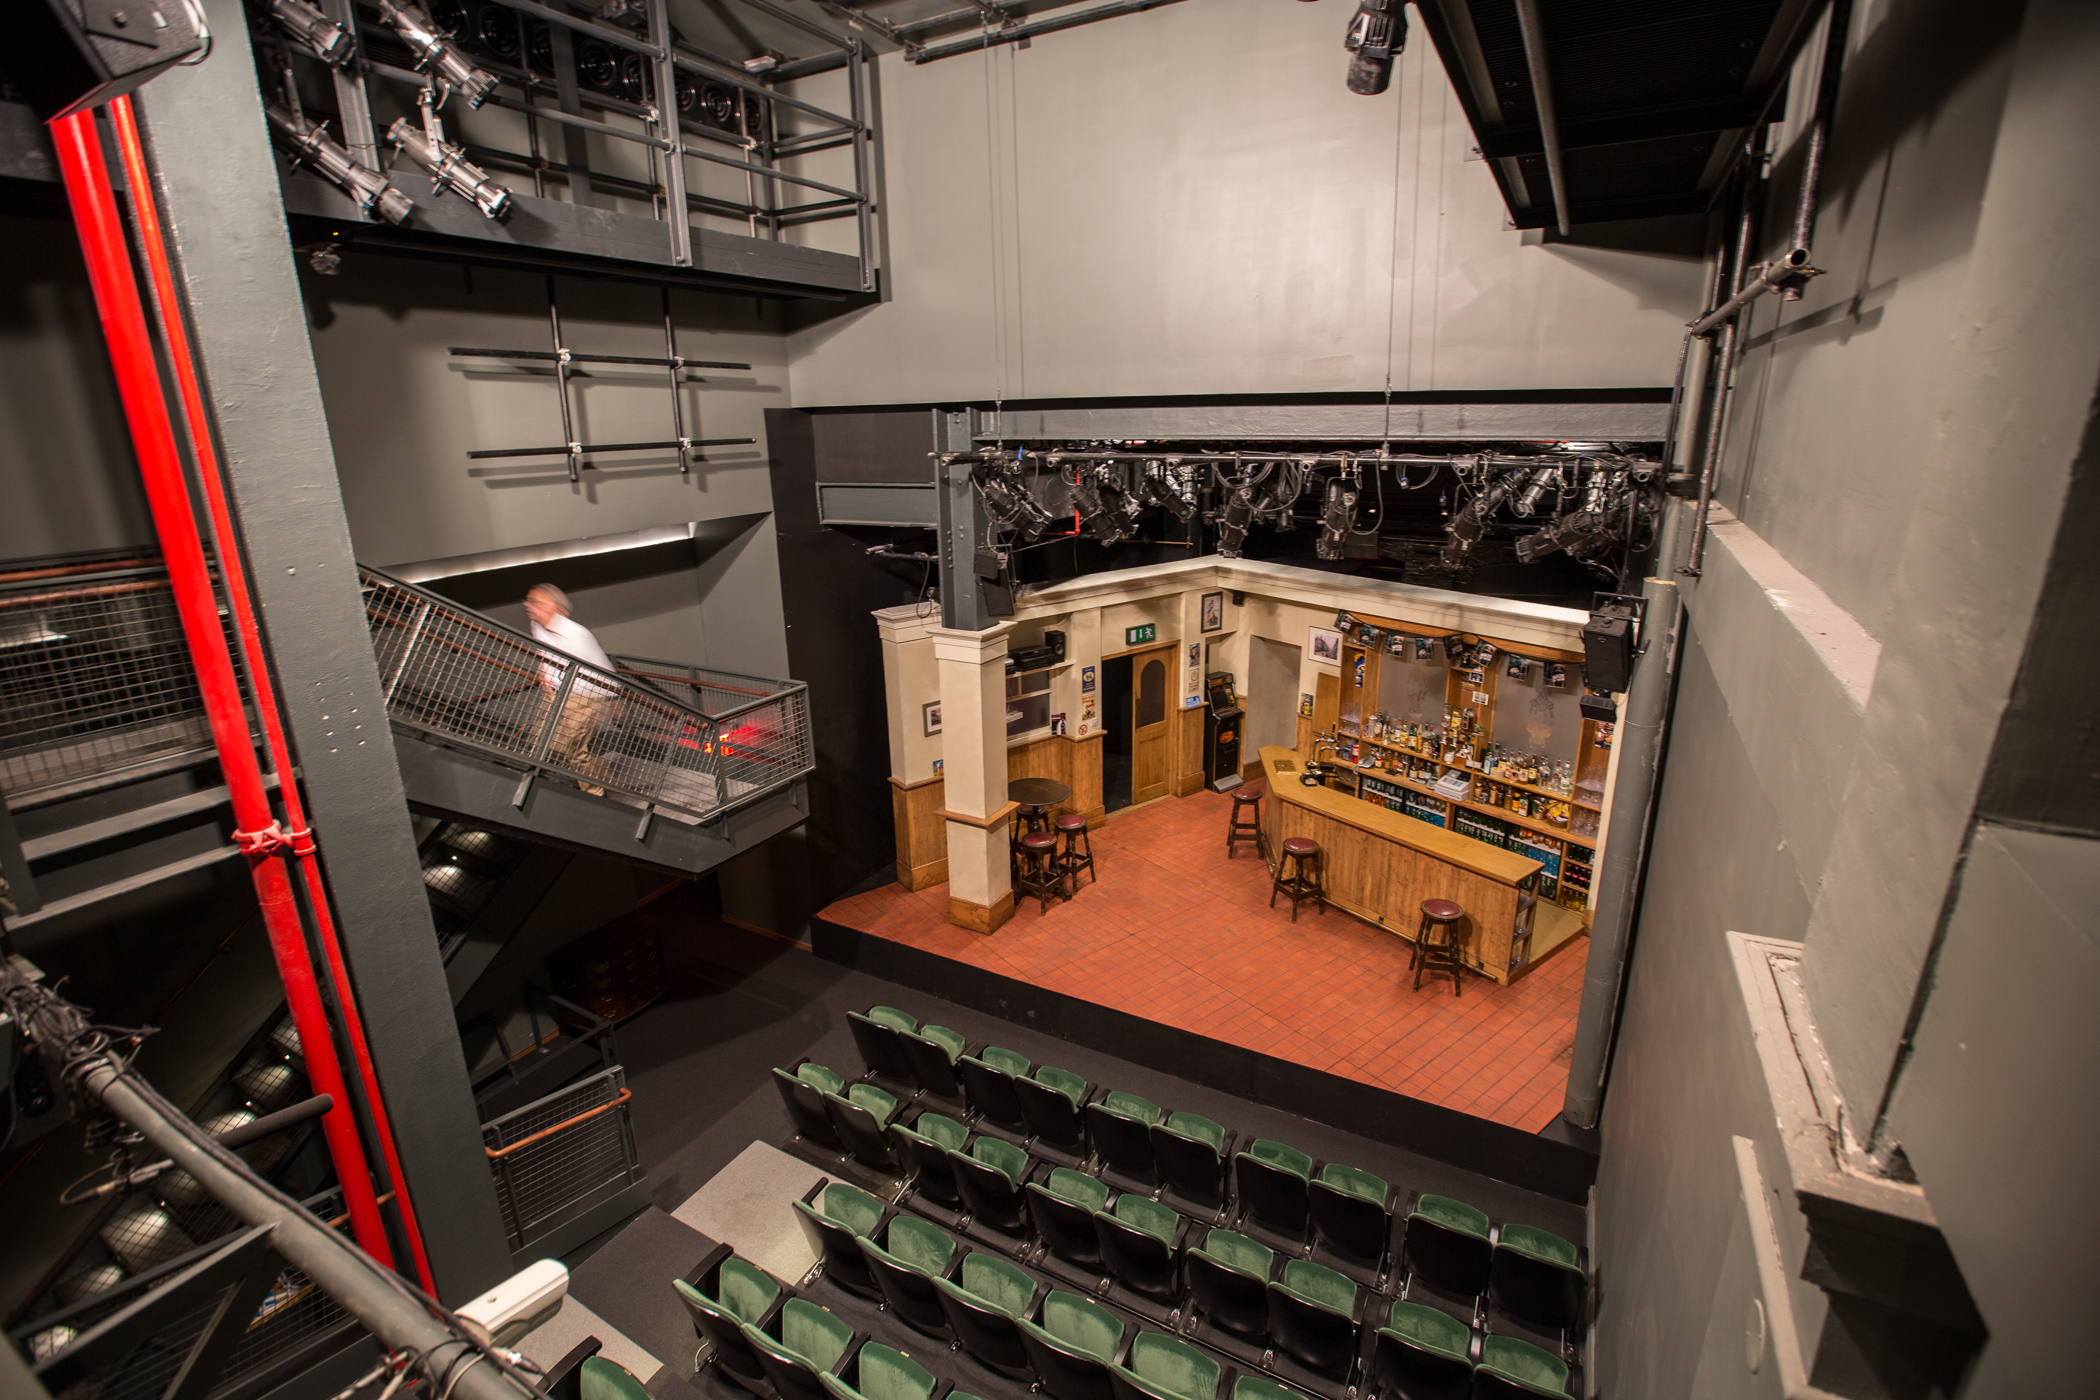 View from the newly constructed balcony inside the Irish Repertory Theater